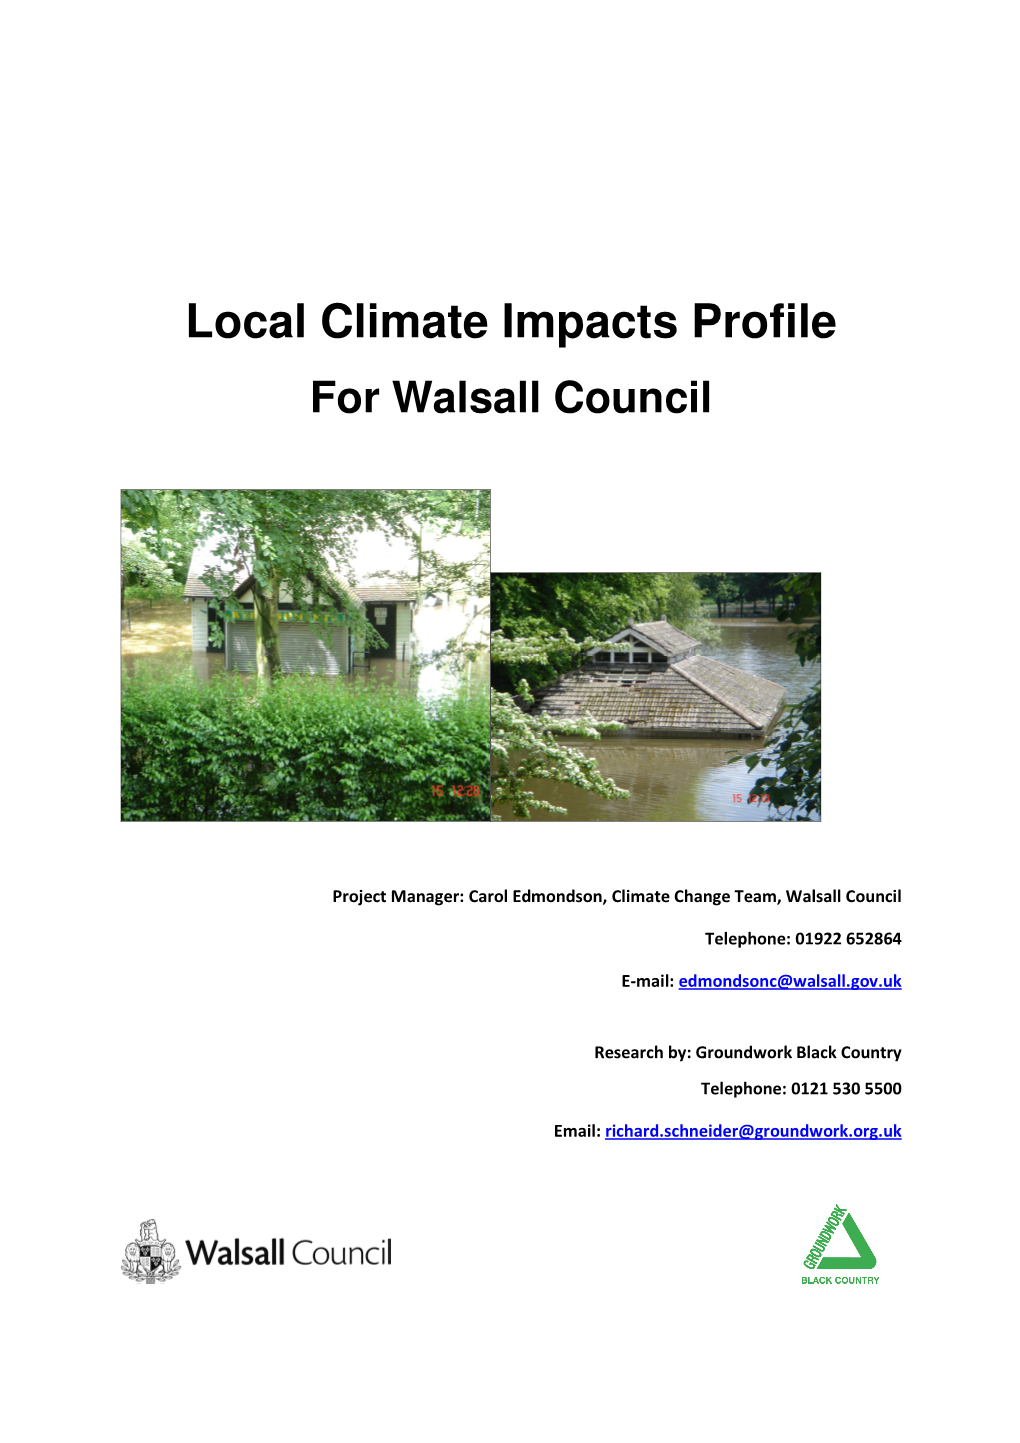 View Walsall's Local Climate Impacts Profile (LCLIP)